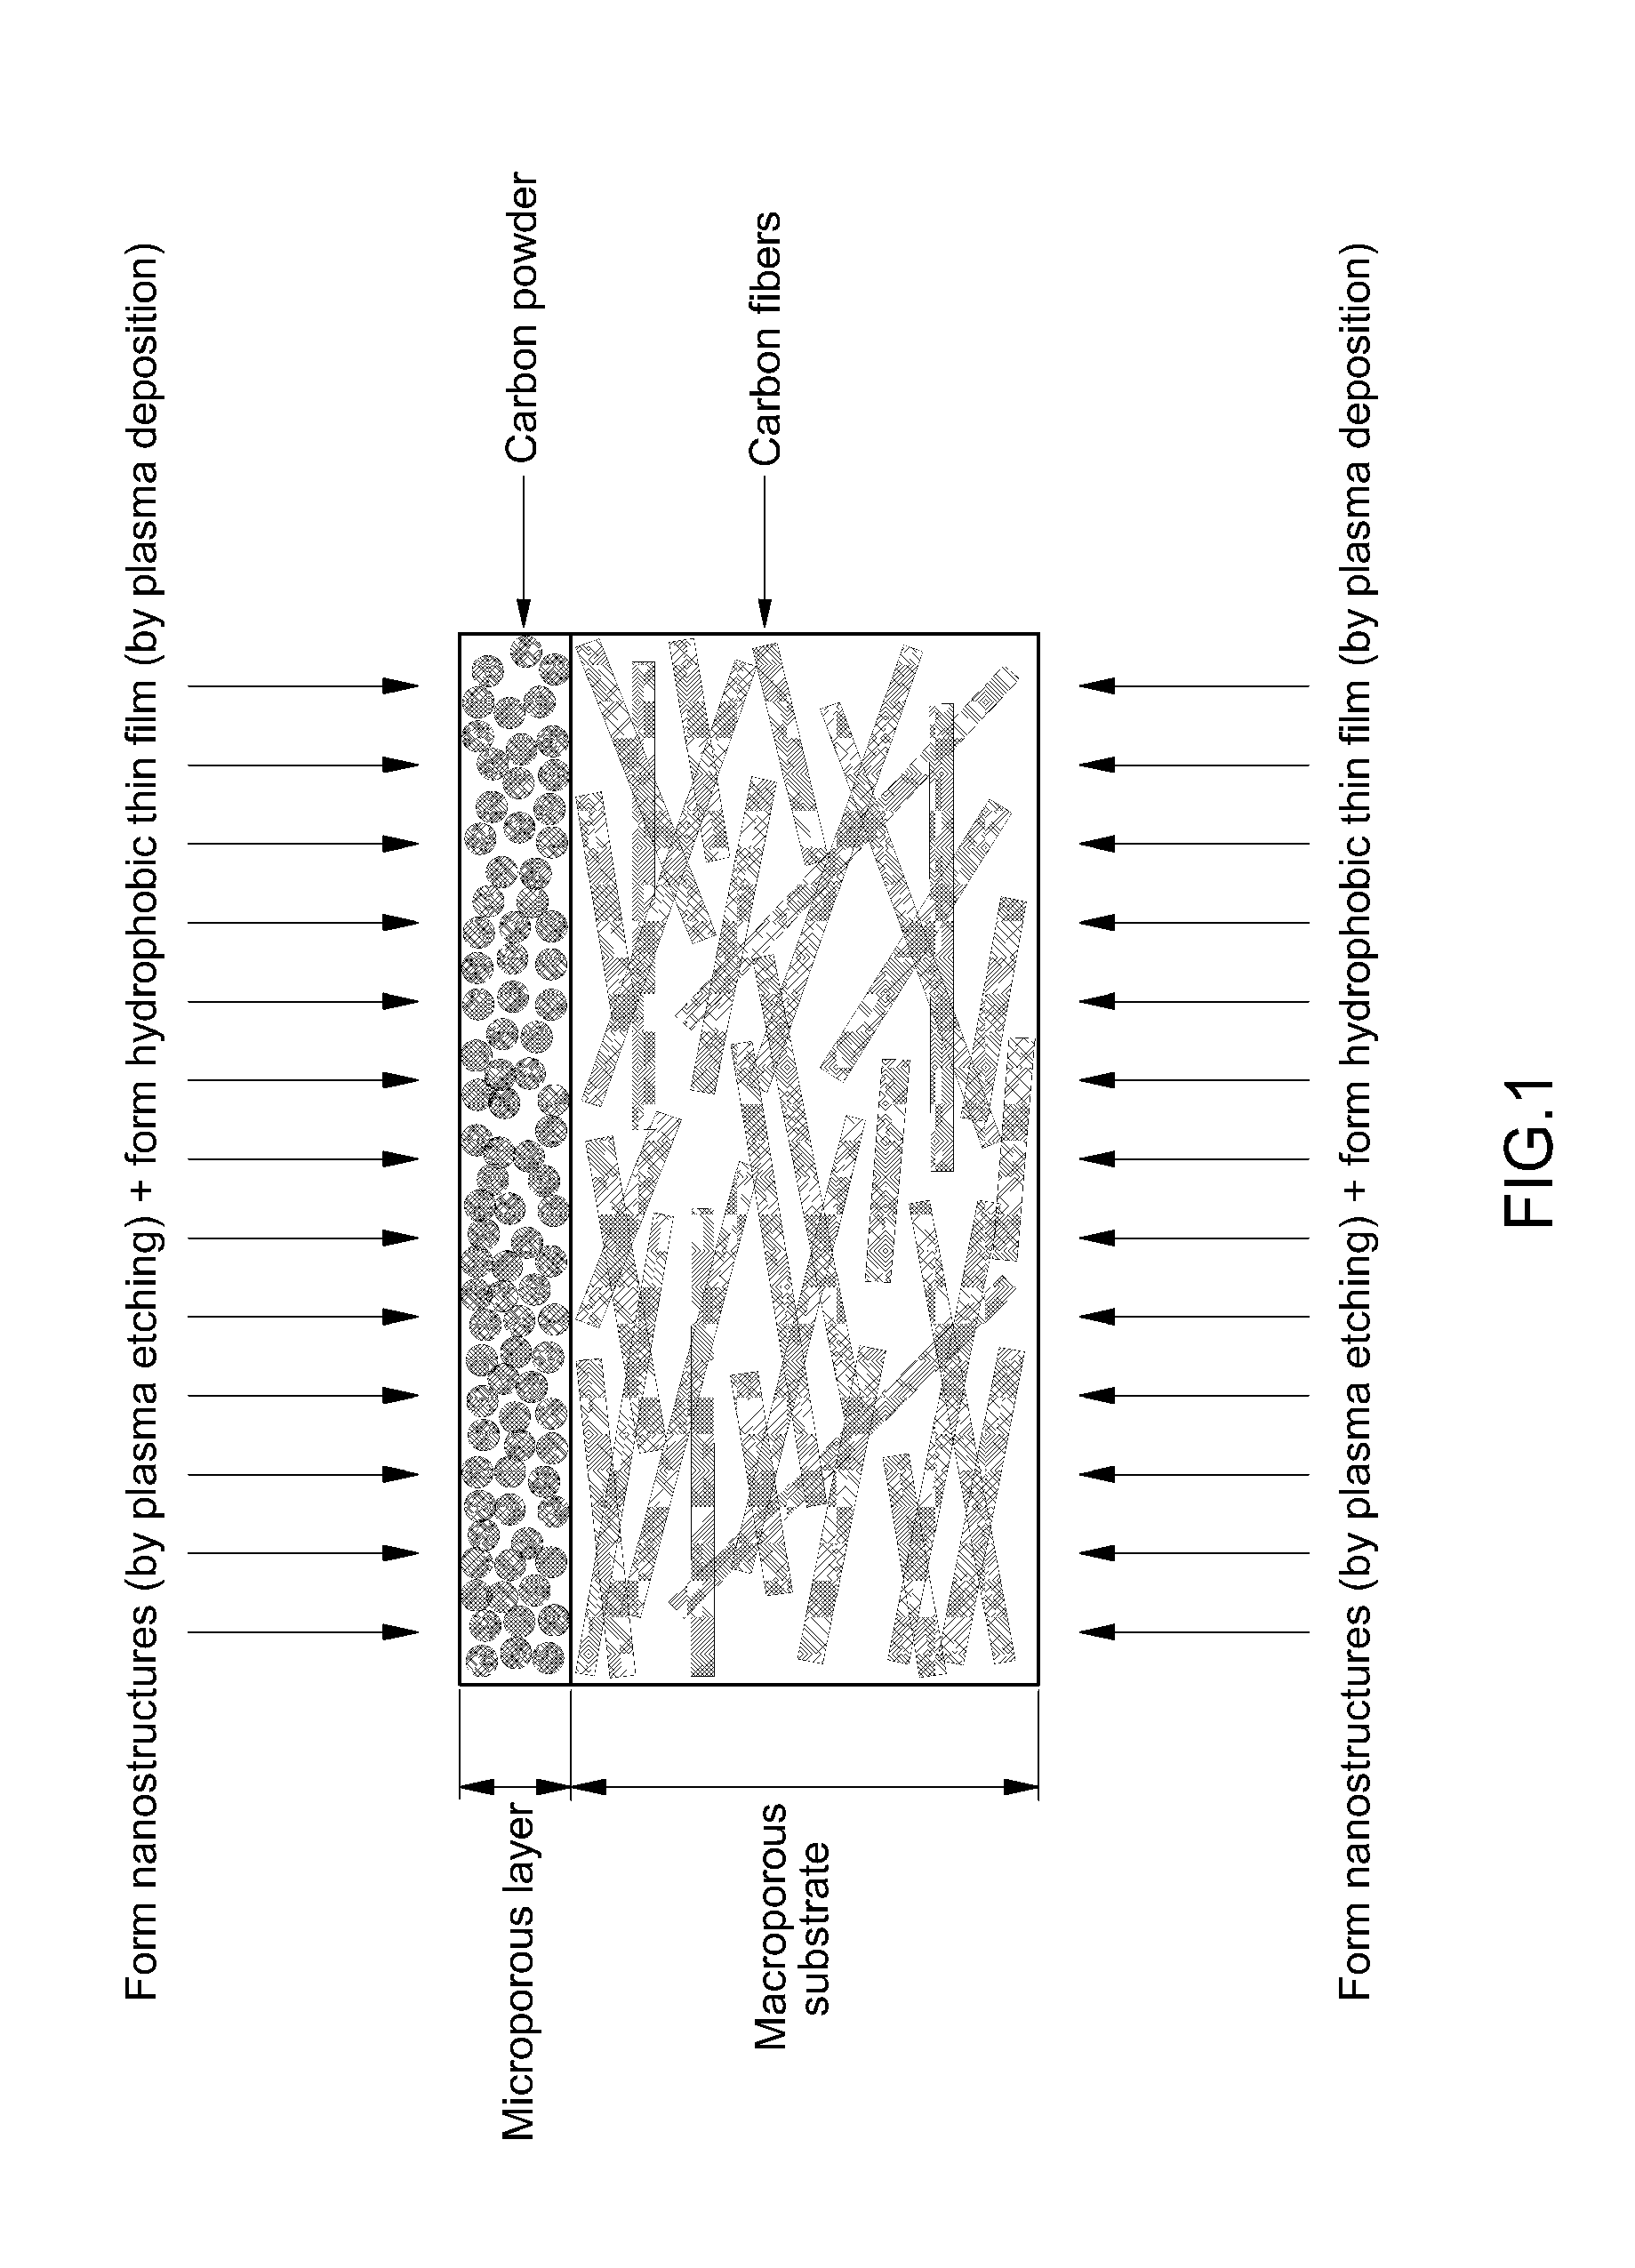 Fuel cell with enhanced mass transfer characteristics